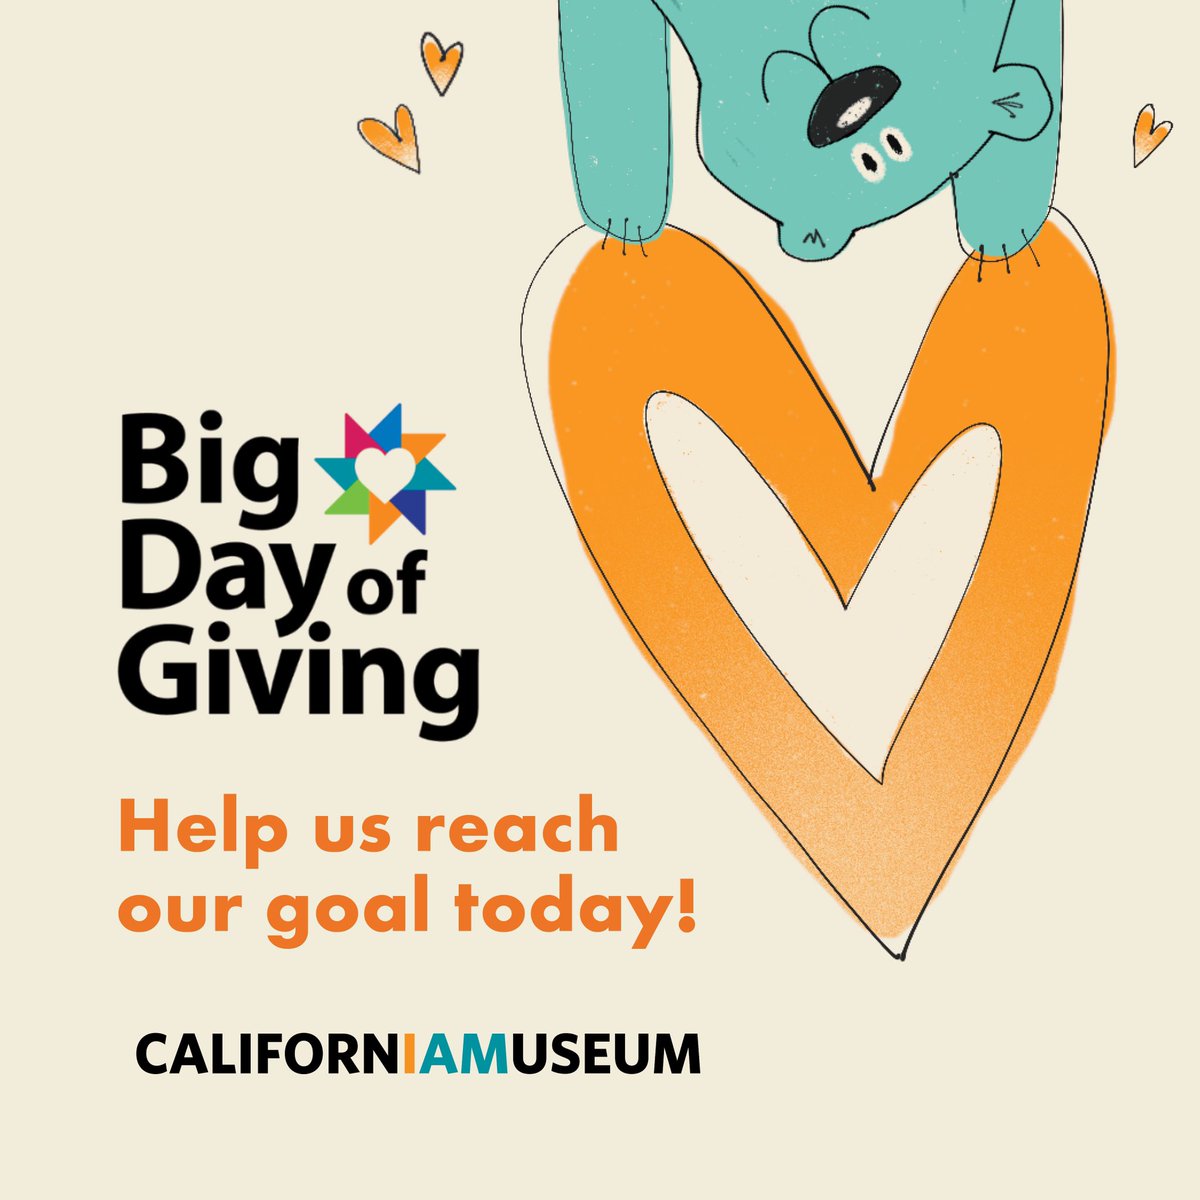 Today's the Big Day! Can you help us reach our goal by midnight? If we meet our $20,000 target, we'll celebrate with a free admission day! As a nonprofit, we rely on your generosity to sustain exhibits & programming. Donate now at BigDayofGiving.org/CaliforniaMuse… or call (916) 651-0935.